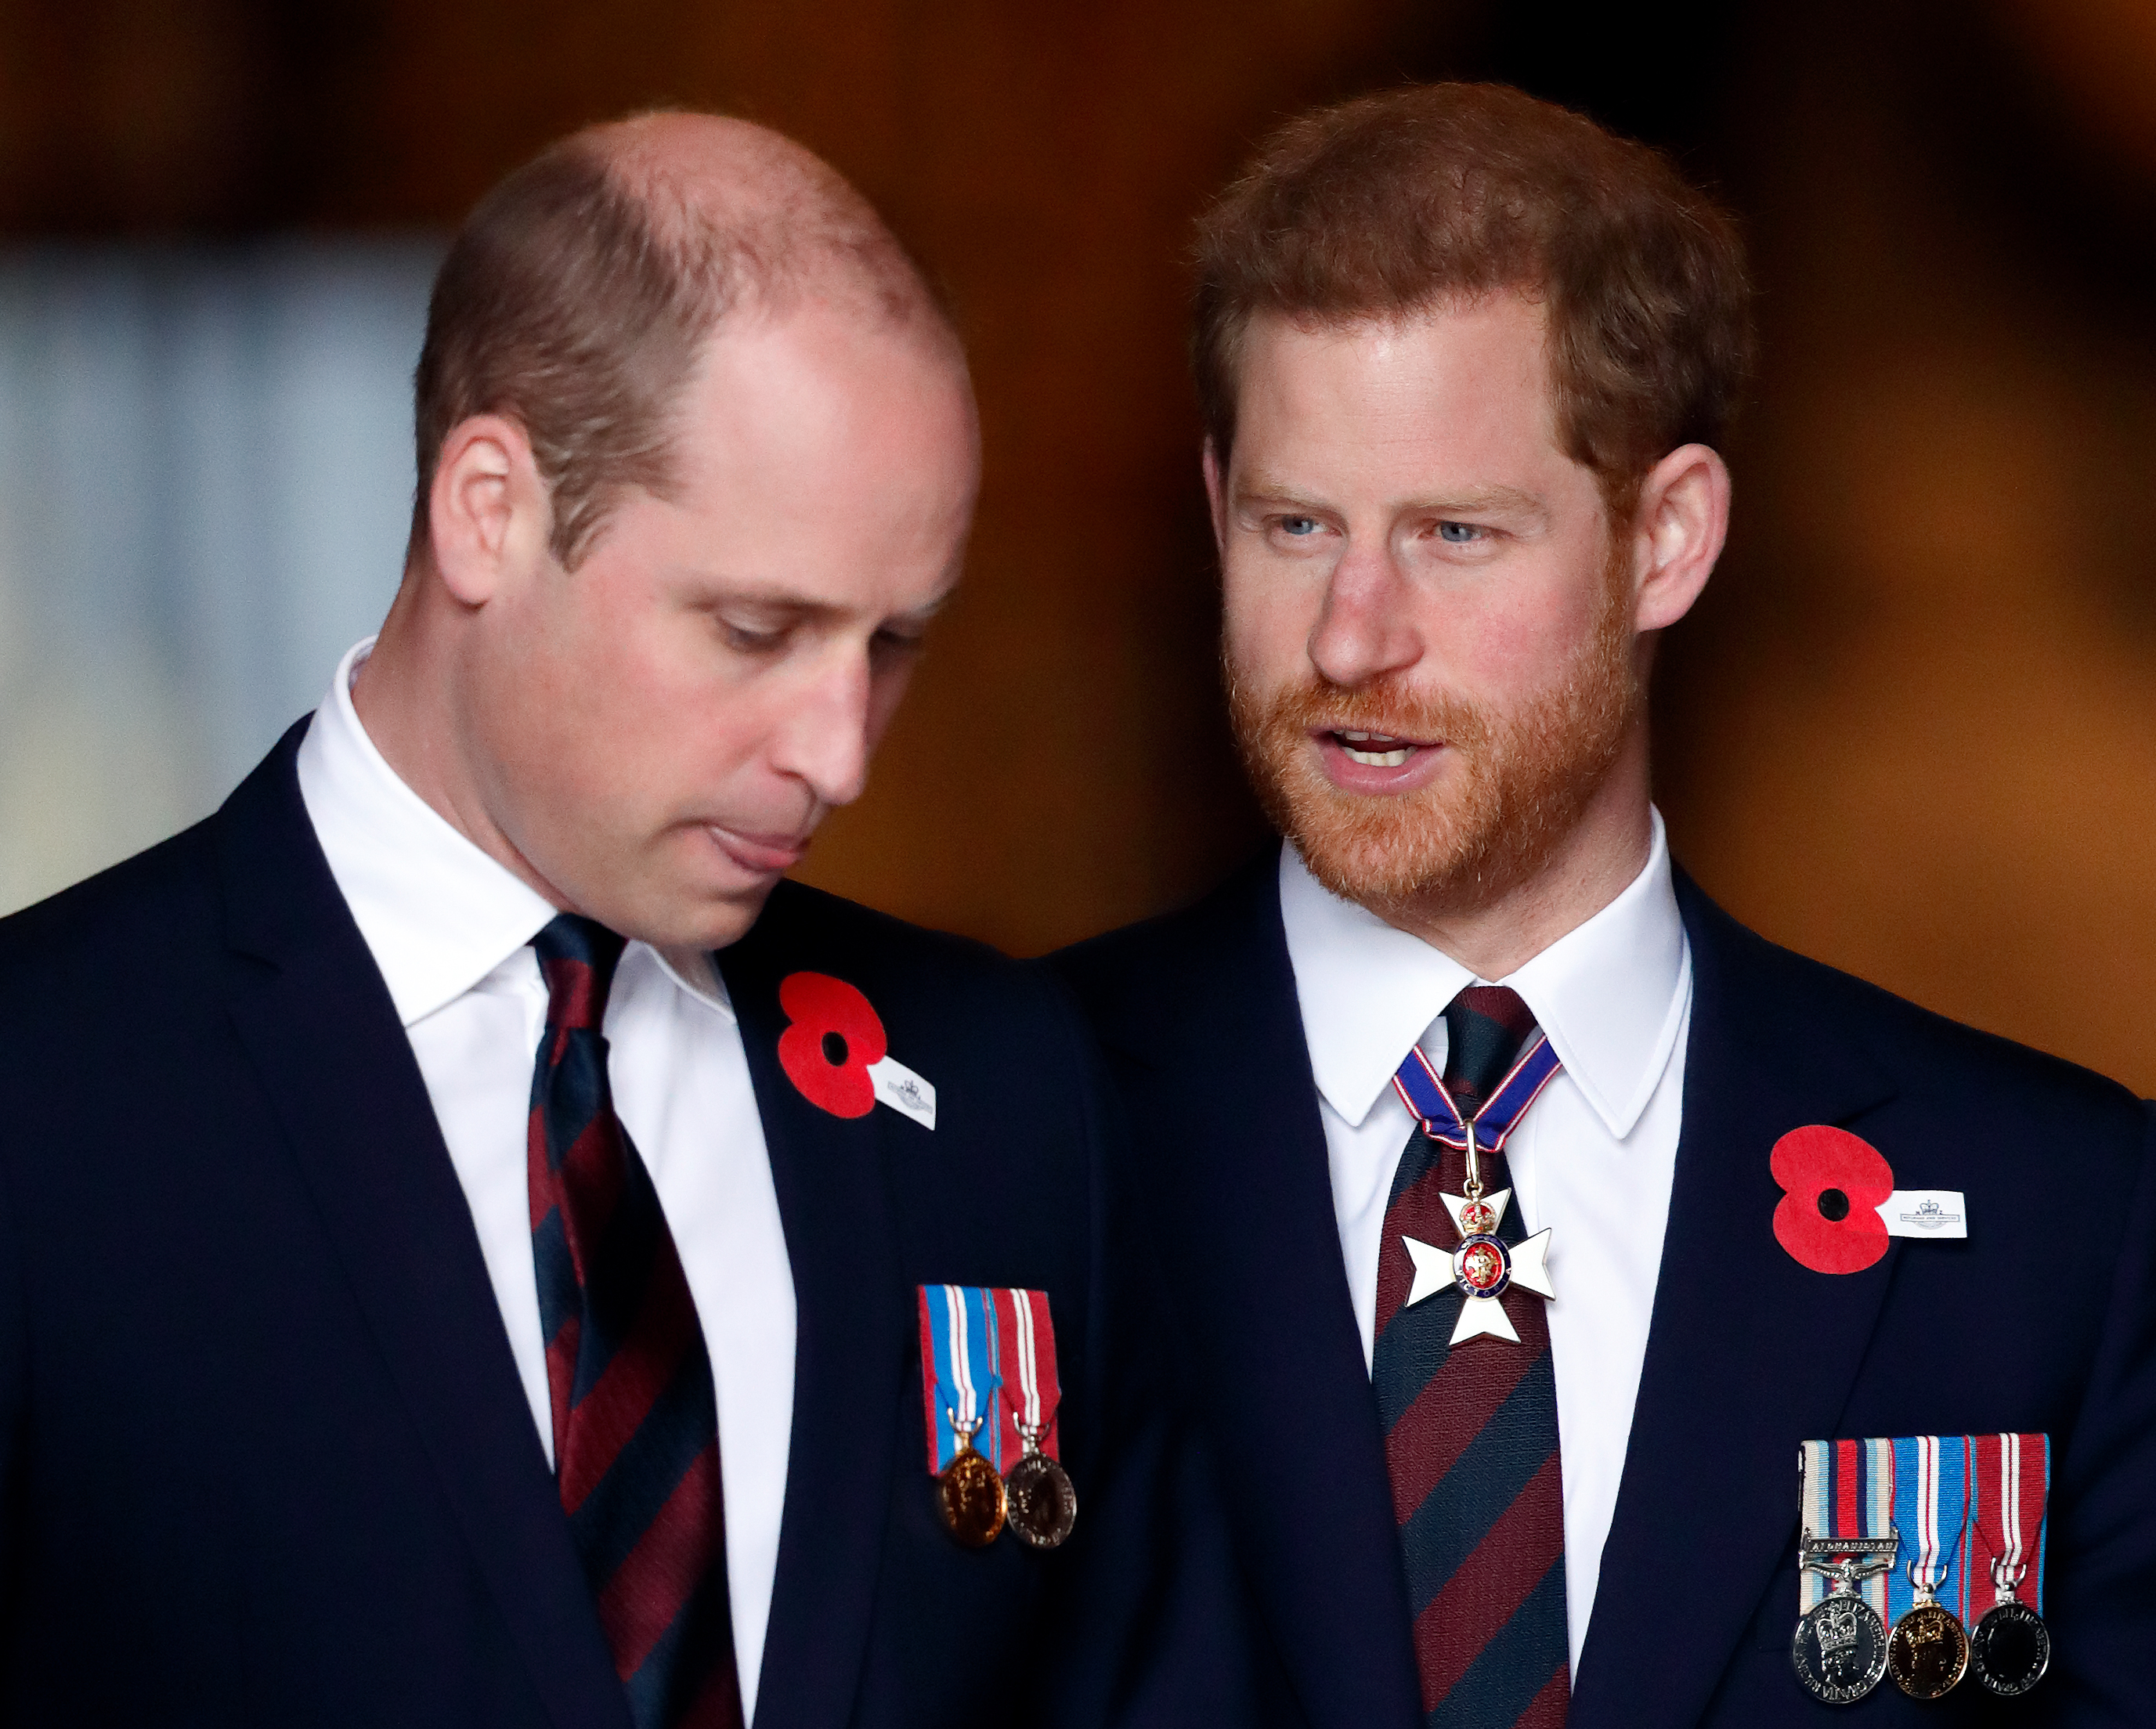 Prince William, Duke of Cambridge and Prince Harry, Duke of Sussex attend an Anzac Day Service of Commemoration and Thanksgiving on April 25, 2018 in London, England | Source: Getty Images